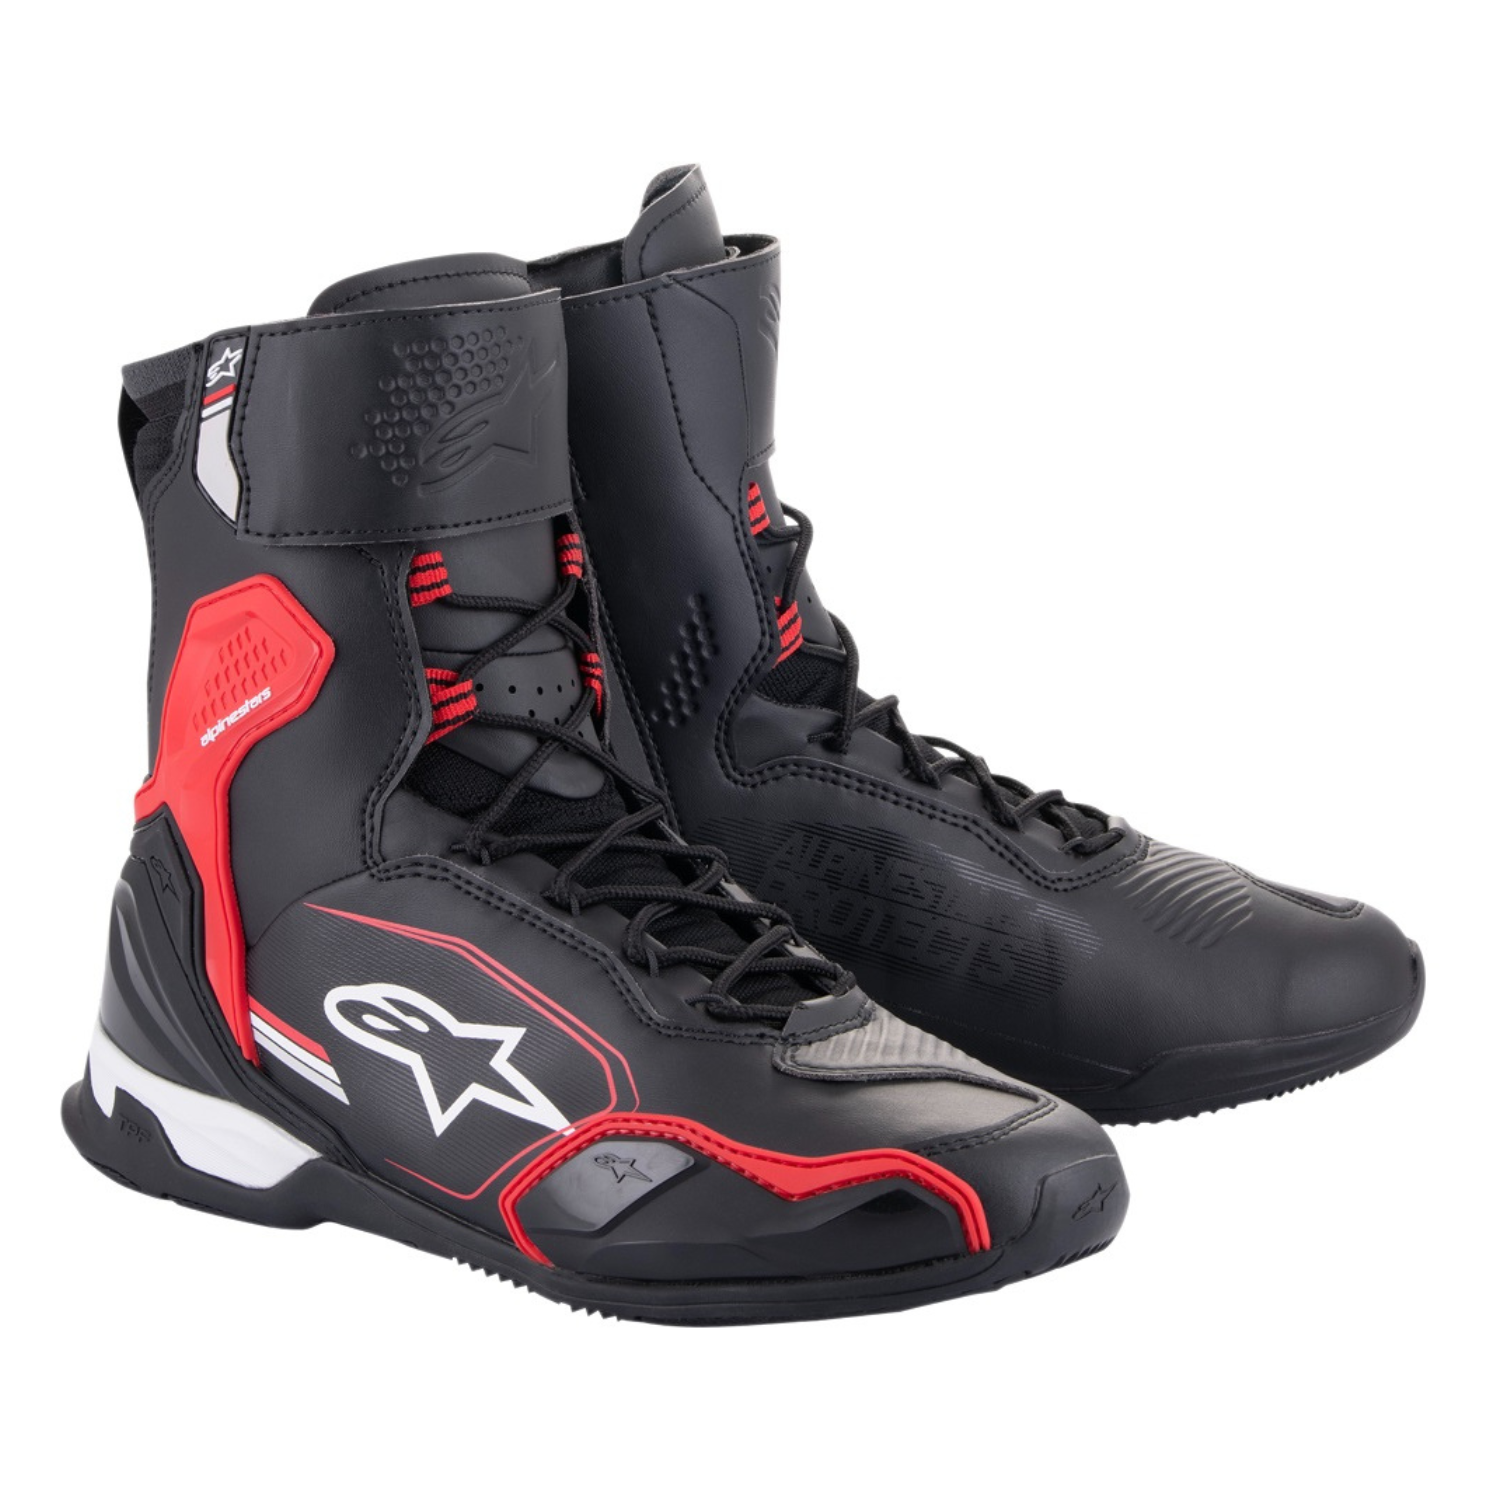 Image of EU Alpinestars Superfaster Shoes Black Bright Red White Taille US 11